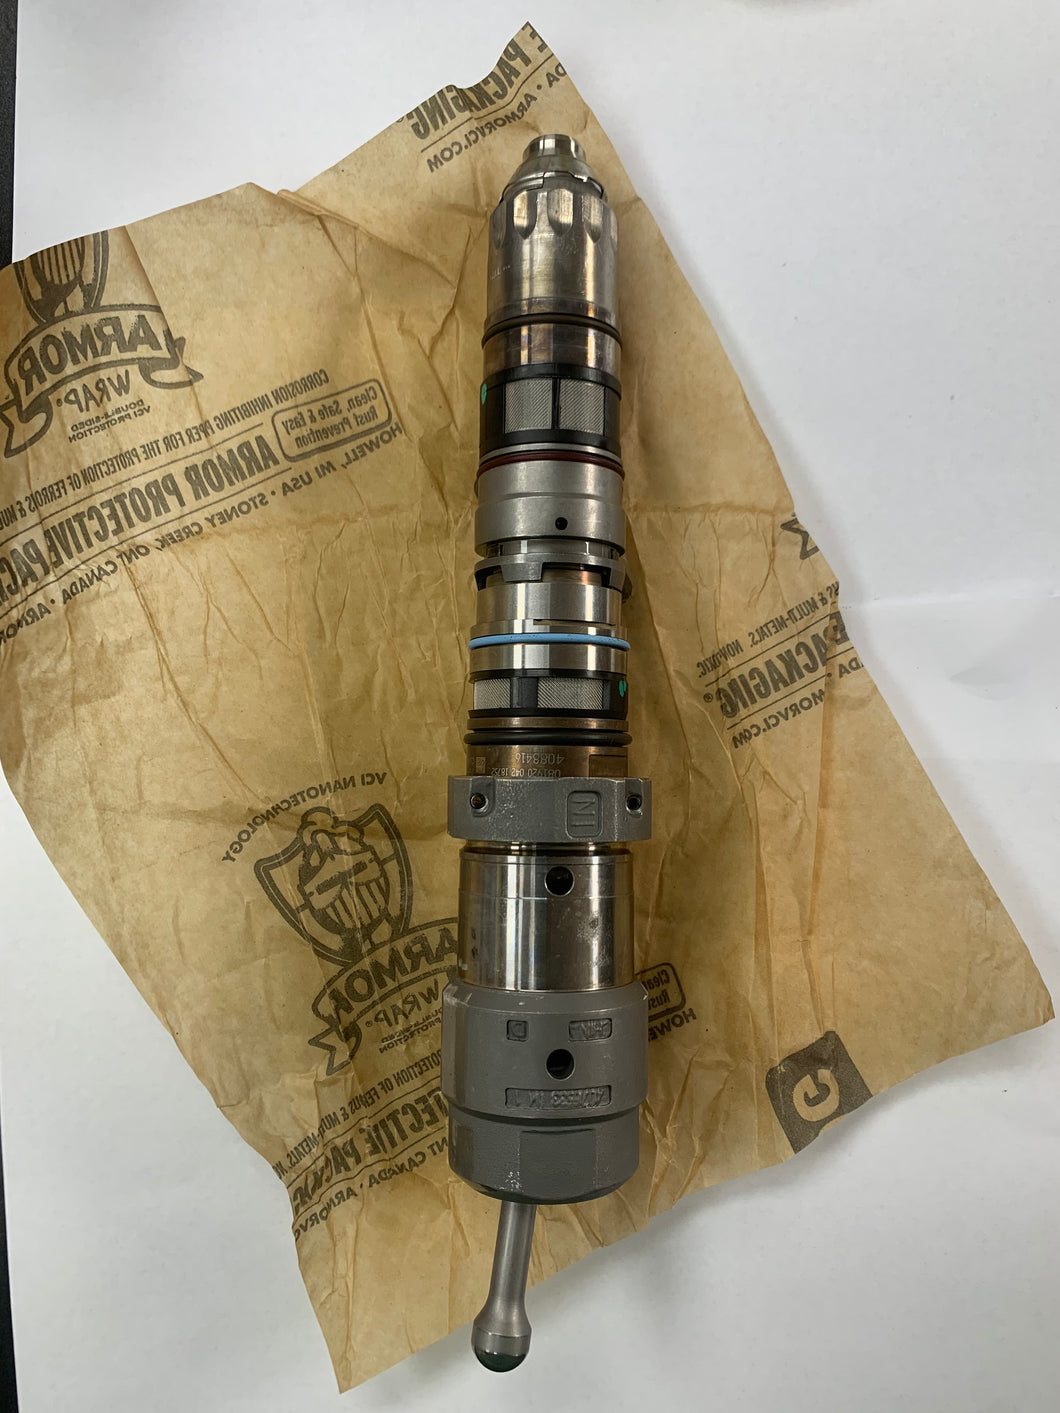 NEW CUMMINS | INJECTOR | 4088431PX | $1190.00 + $250.00 CORE CHARGE